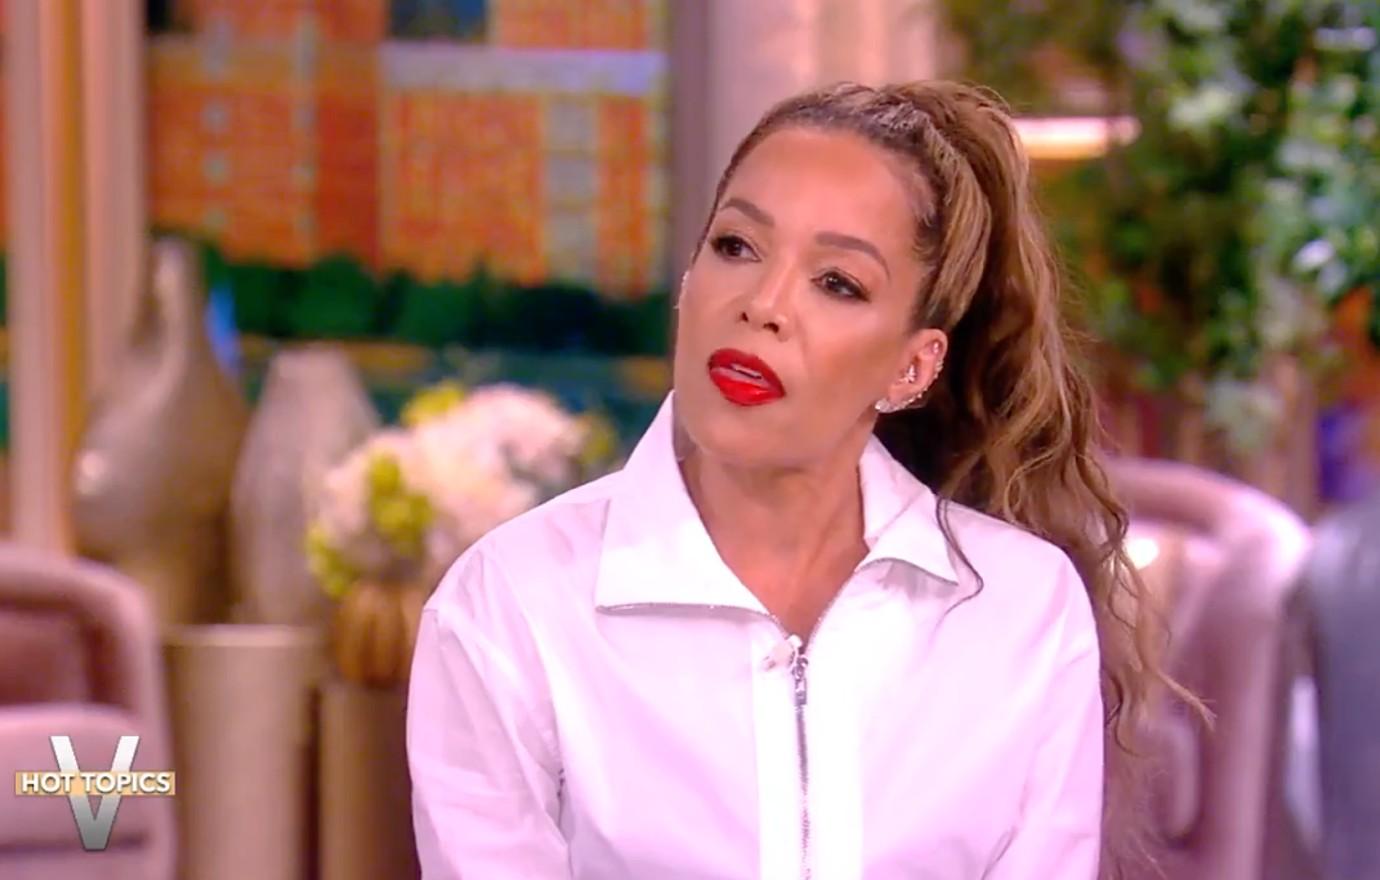 Sunny Hostin Reacts To Claims 'The View' Star Dresses 'Too Young